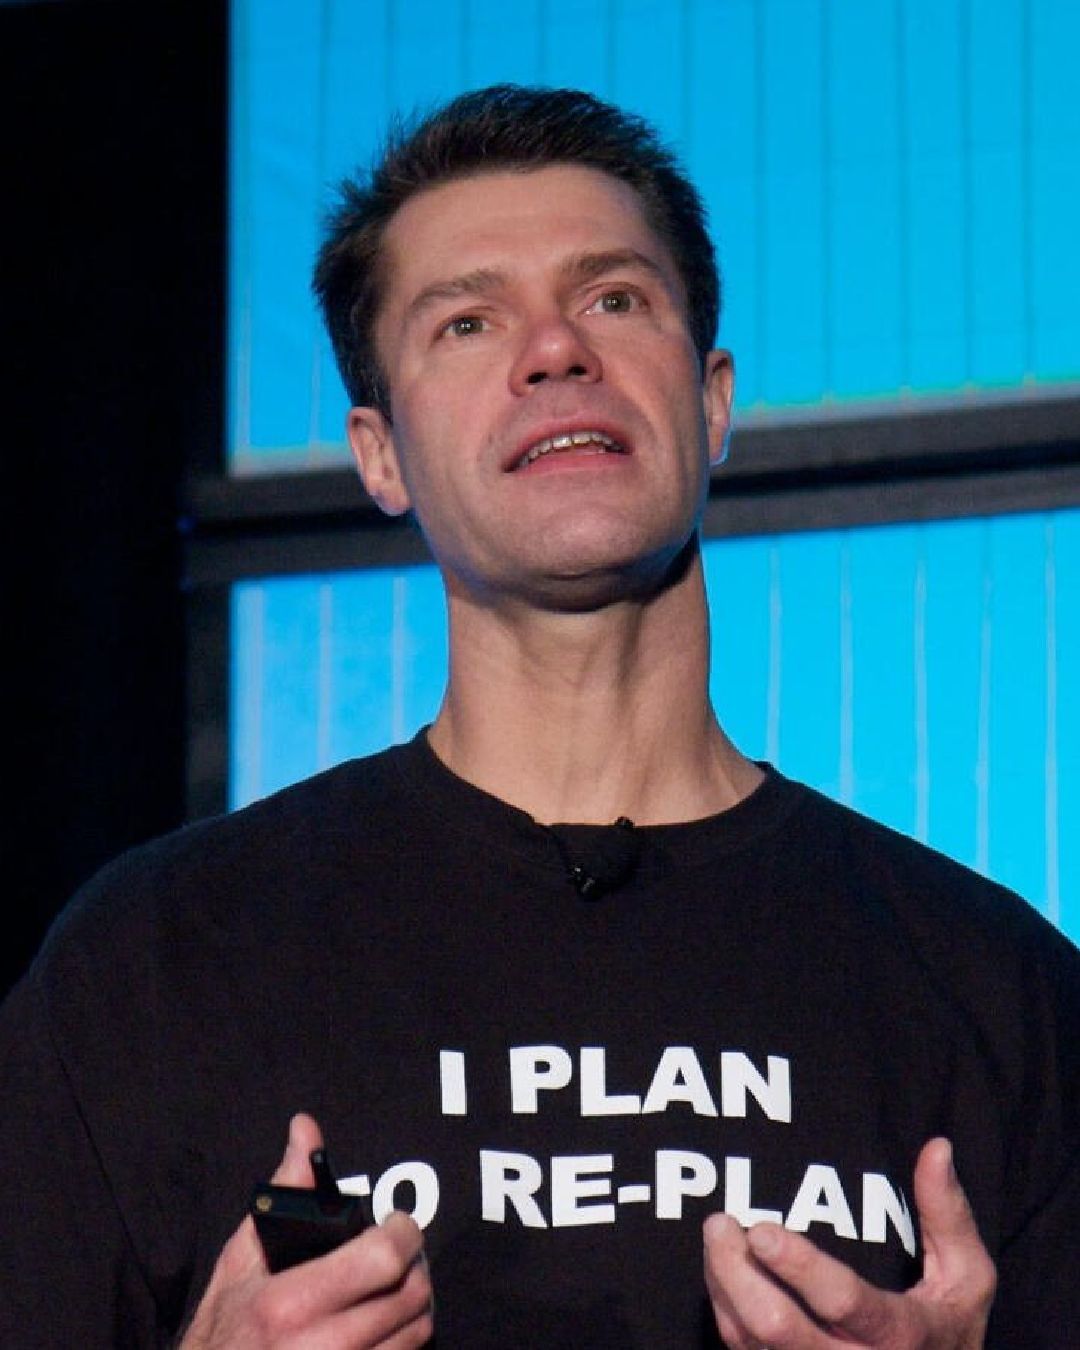 A close up photo of Luke Holmann while he speaks on a stage. Luke is a white man with brown hair and is wearing a black t-shirt that reads 